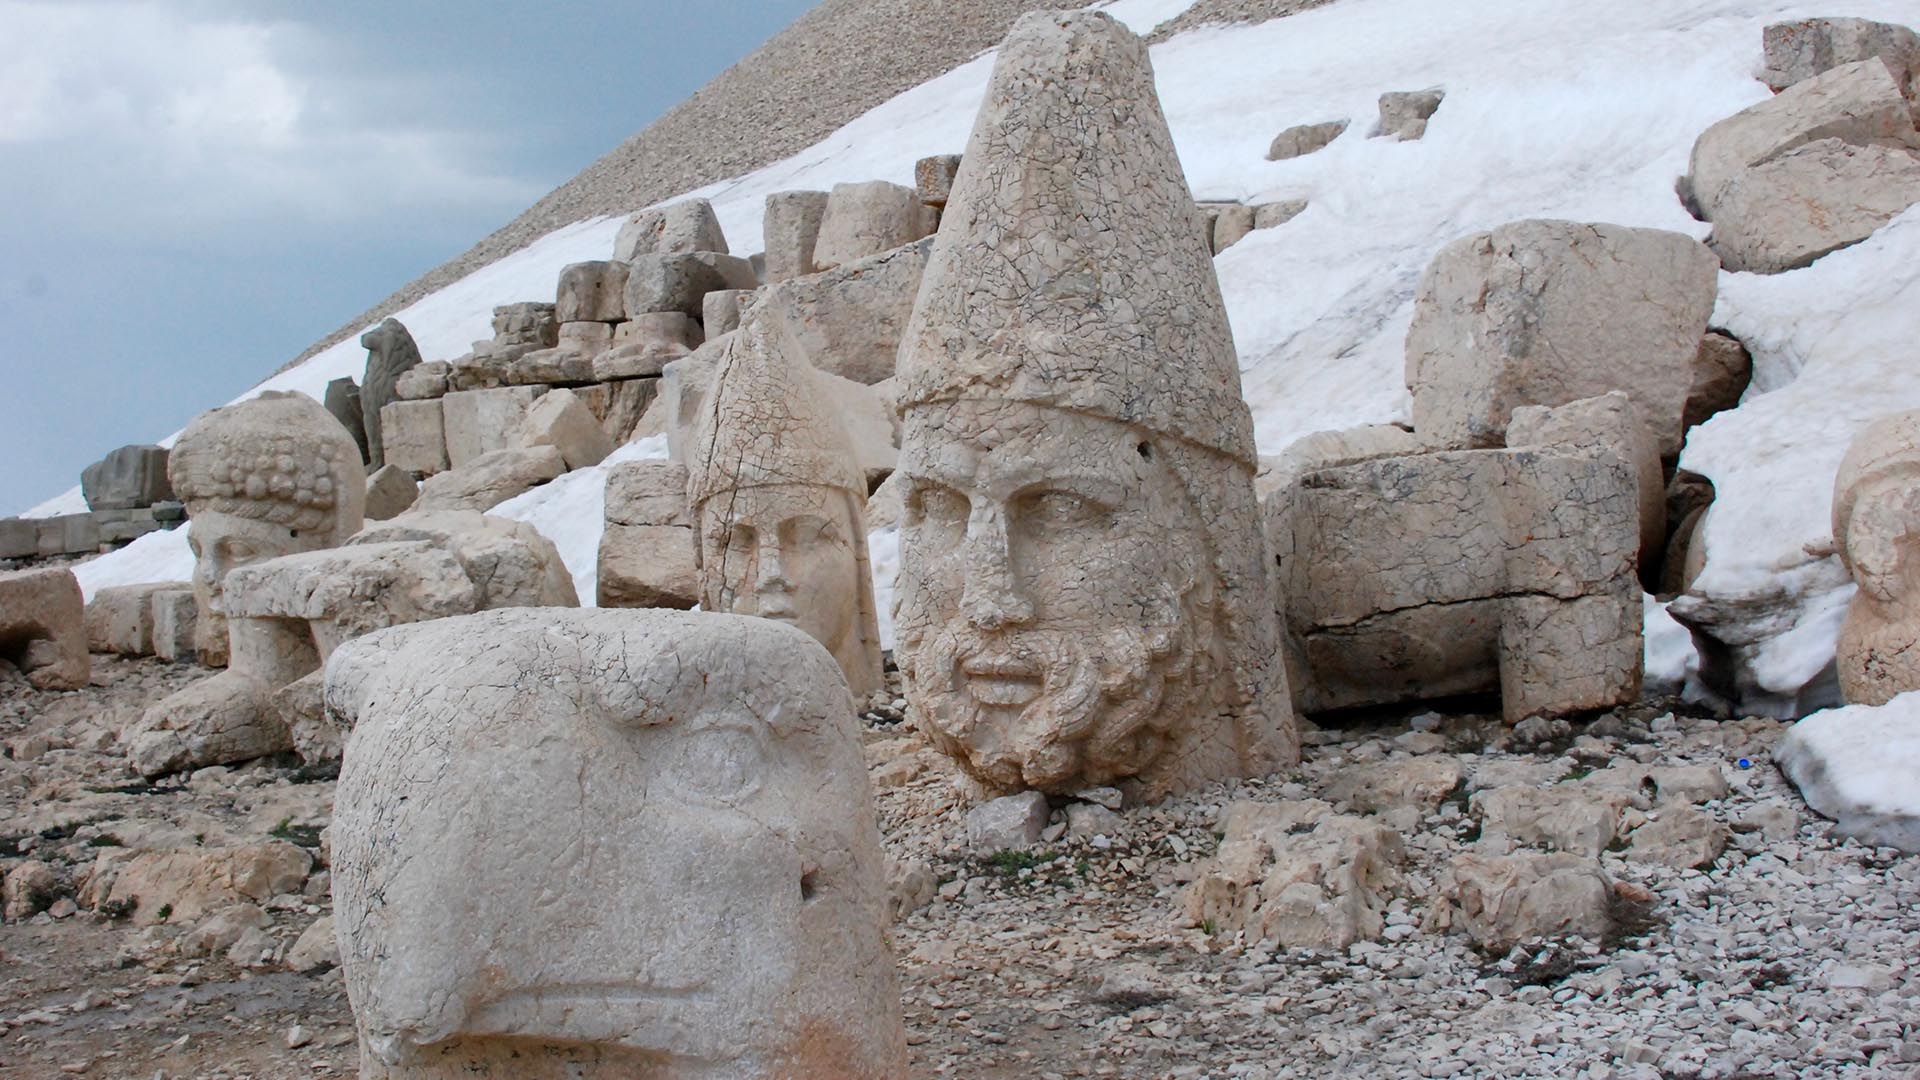 Statue Heads at Hierotheseion - PID000149 Turkey Nemrut Dag 2013 05 Statue HeaDs At Hierotheseion Of King Antiochos I Of Commagene